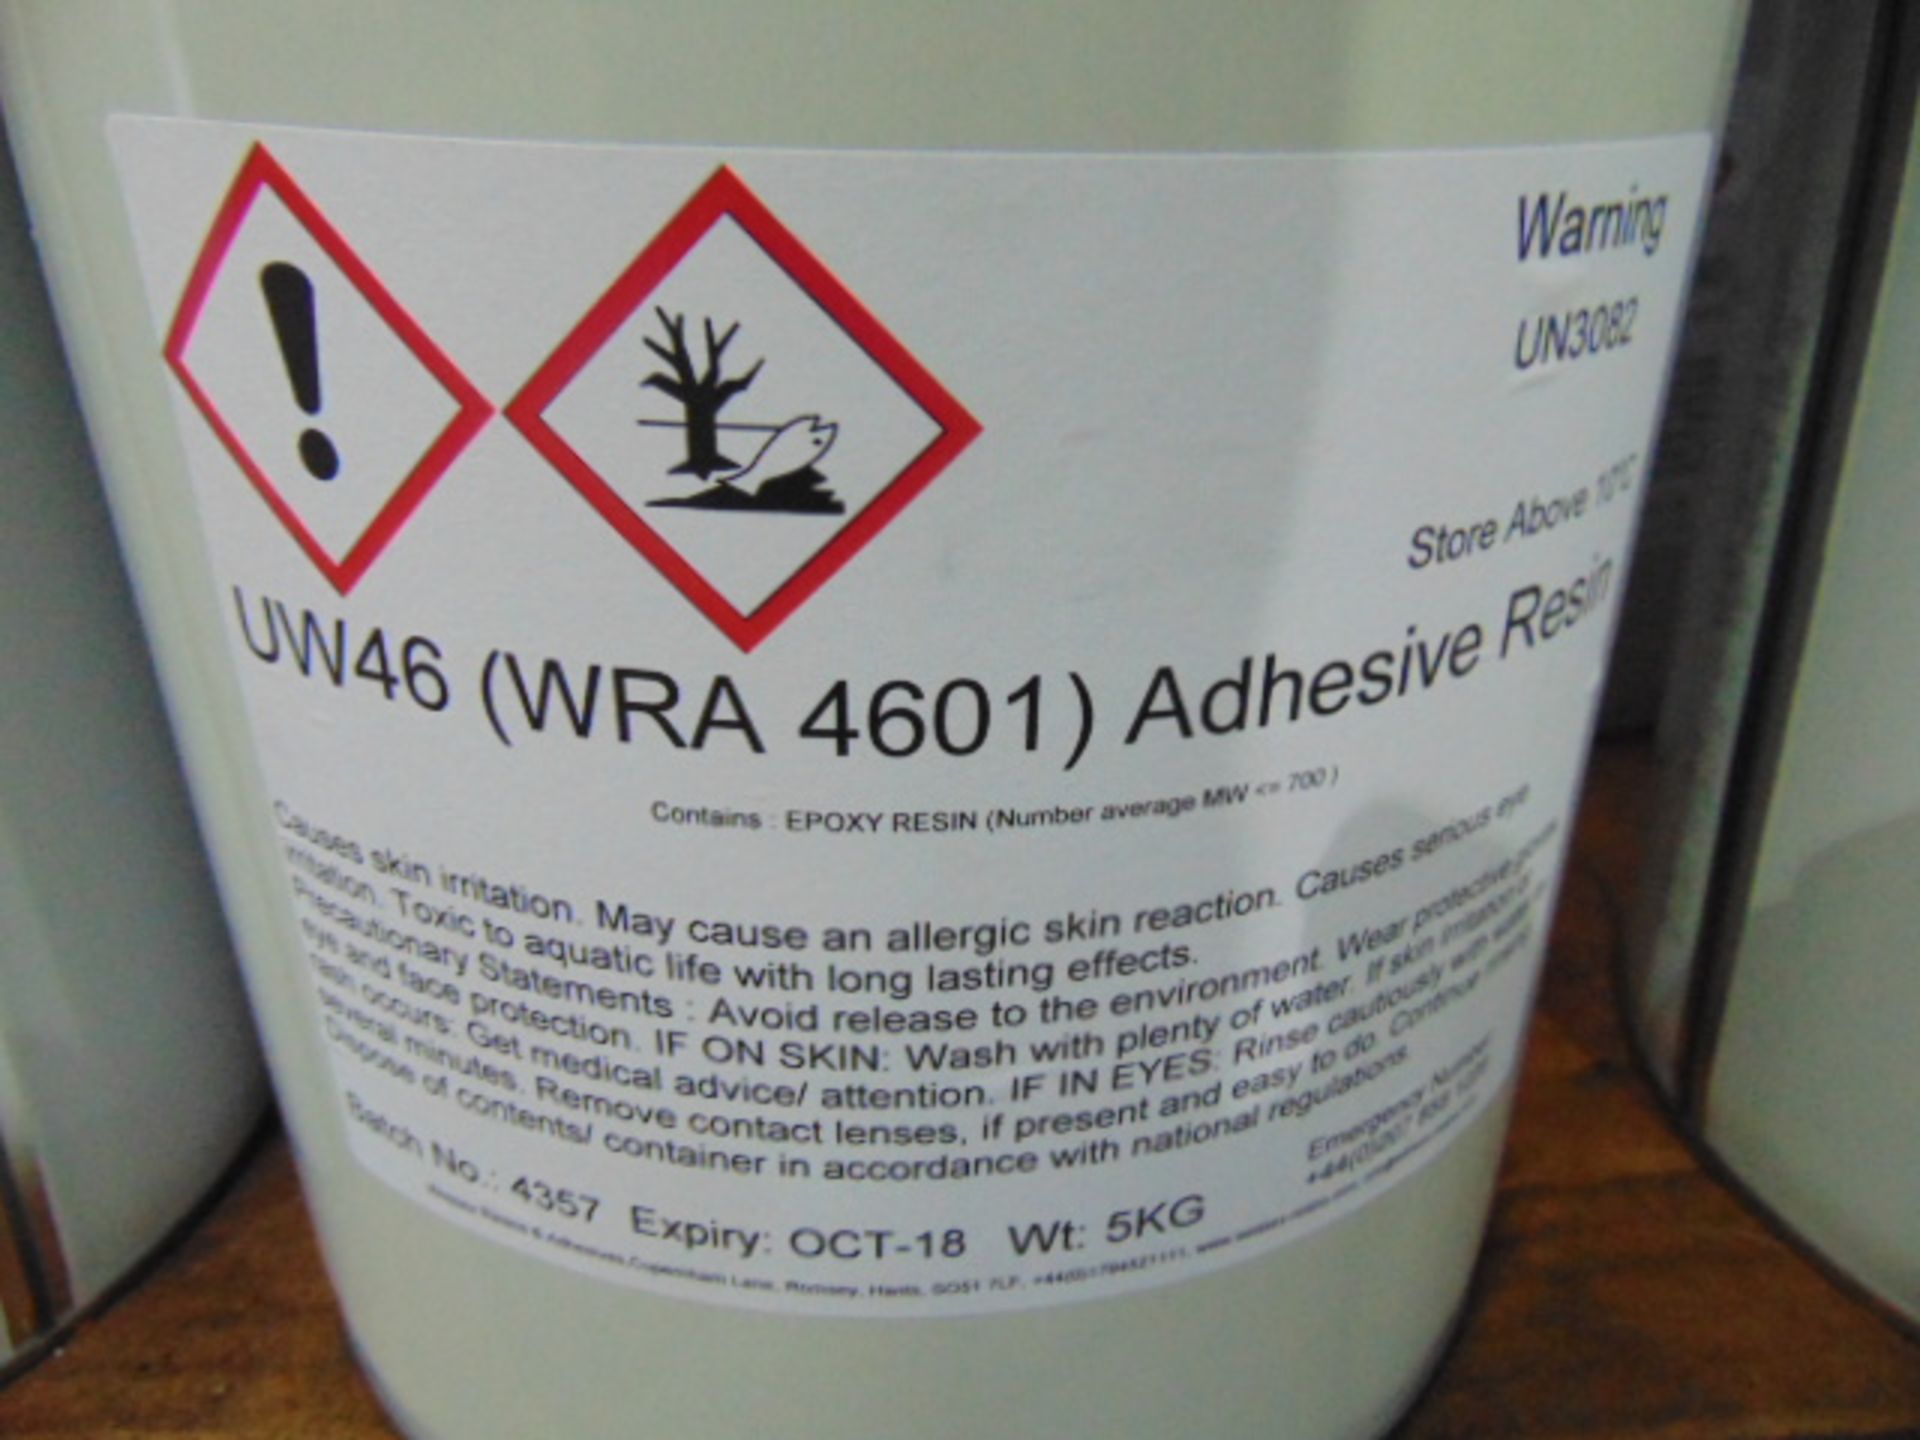 30 x Unissued Cans of UW46 (WRA4601) Epoxy Resin - Image 3 of 4